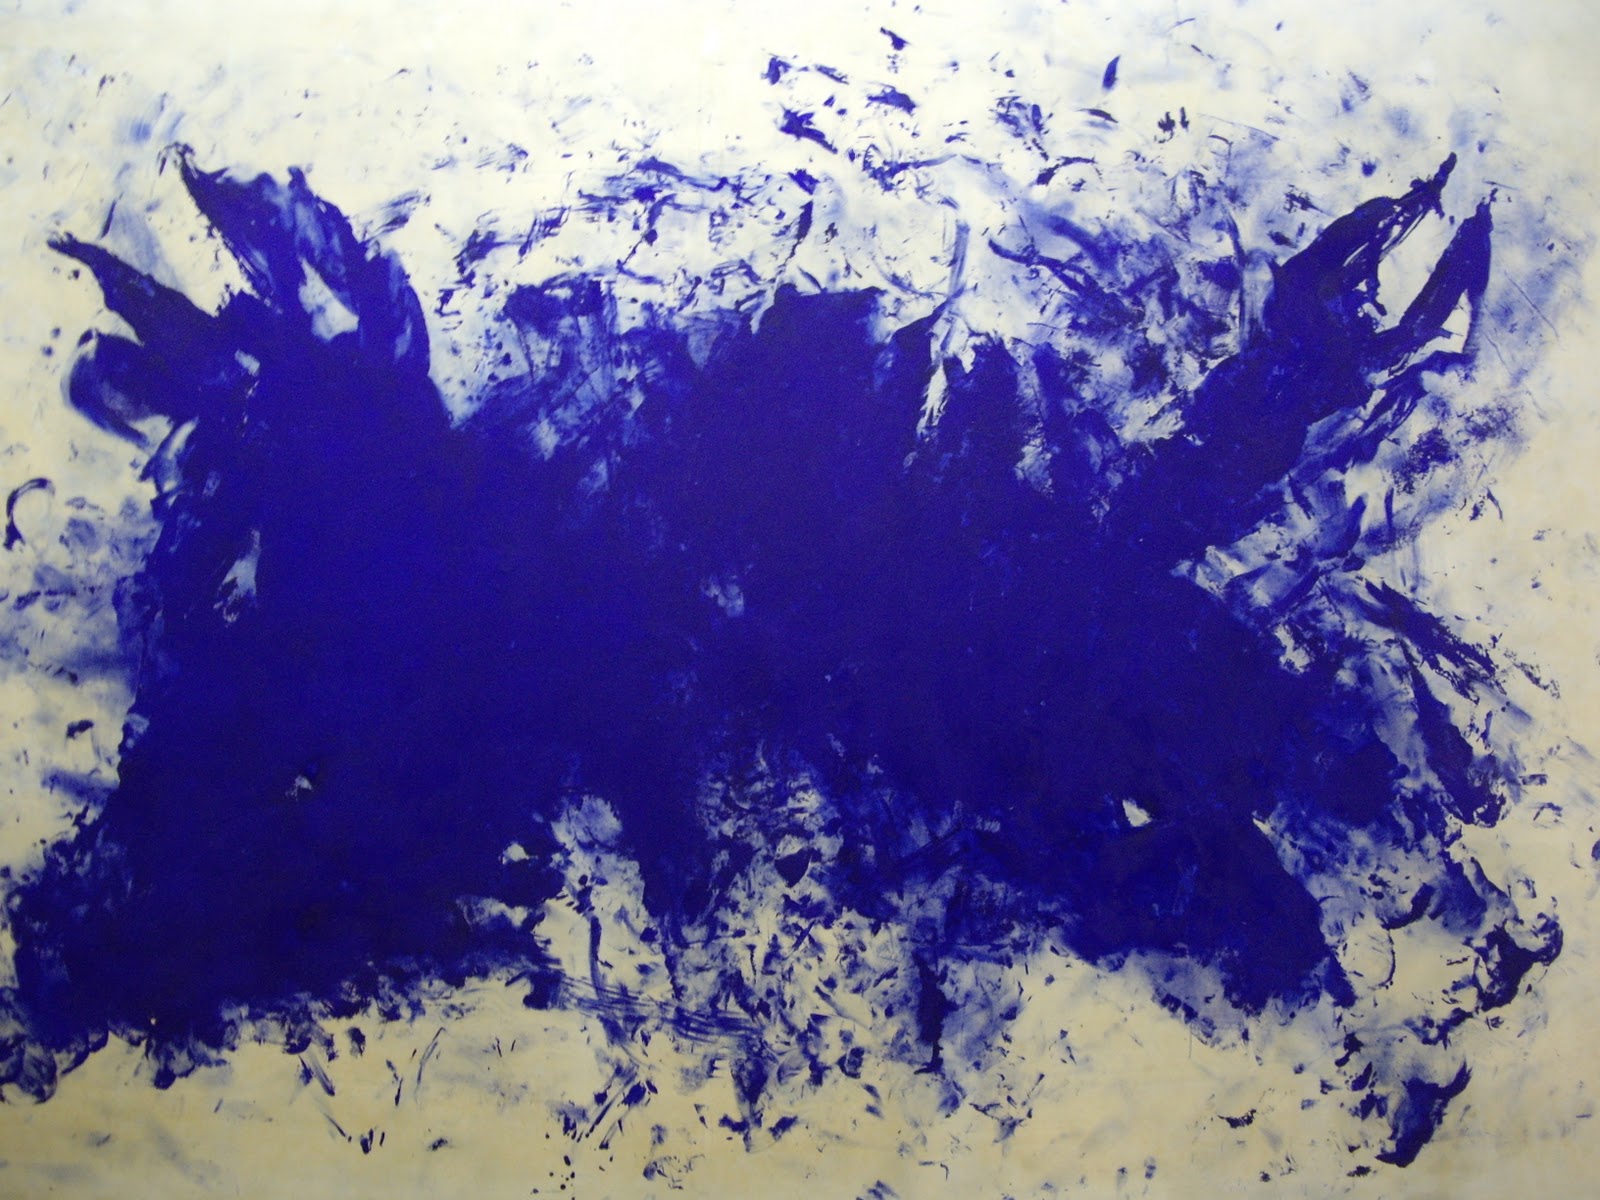 Grand Canibalisme Bleu, Homage à Tennessee Williams by Yves Klein - 1960 - 276 x 418 cm Centre Pompidou